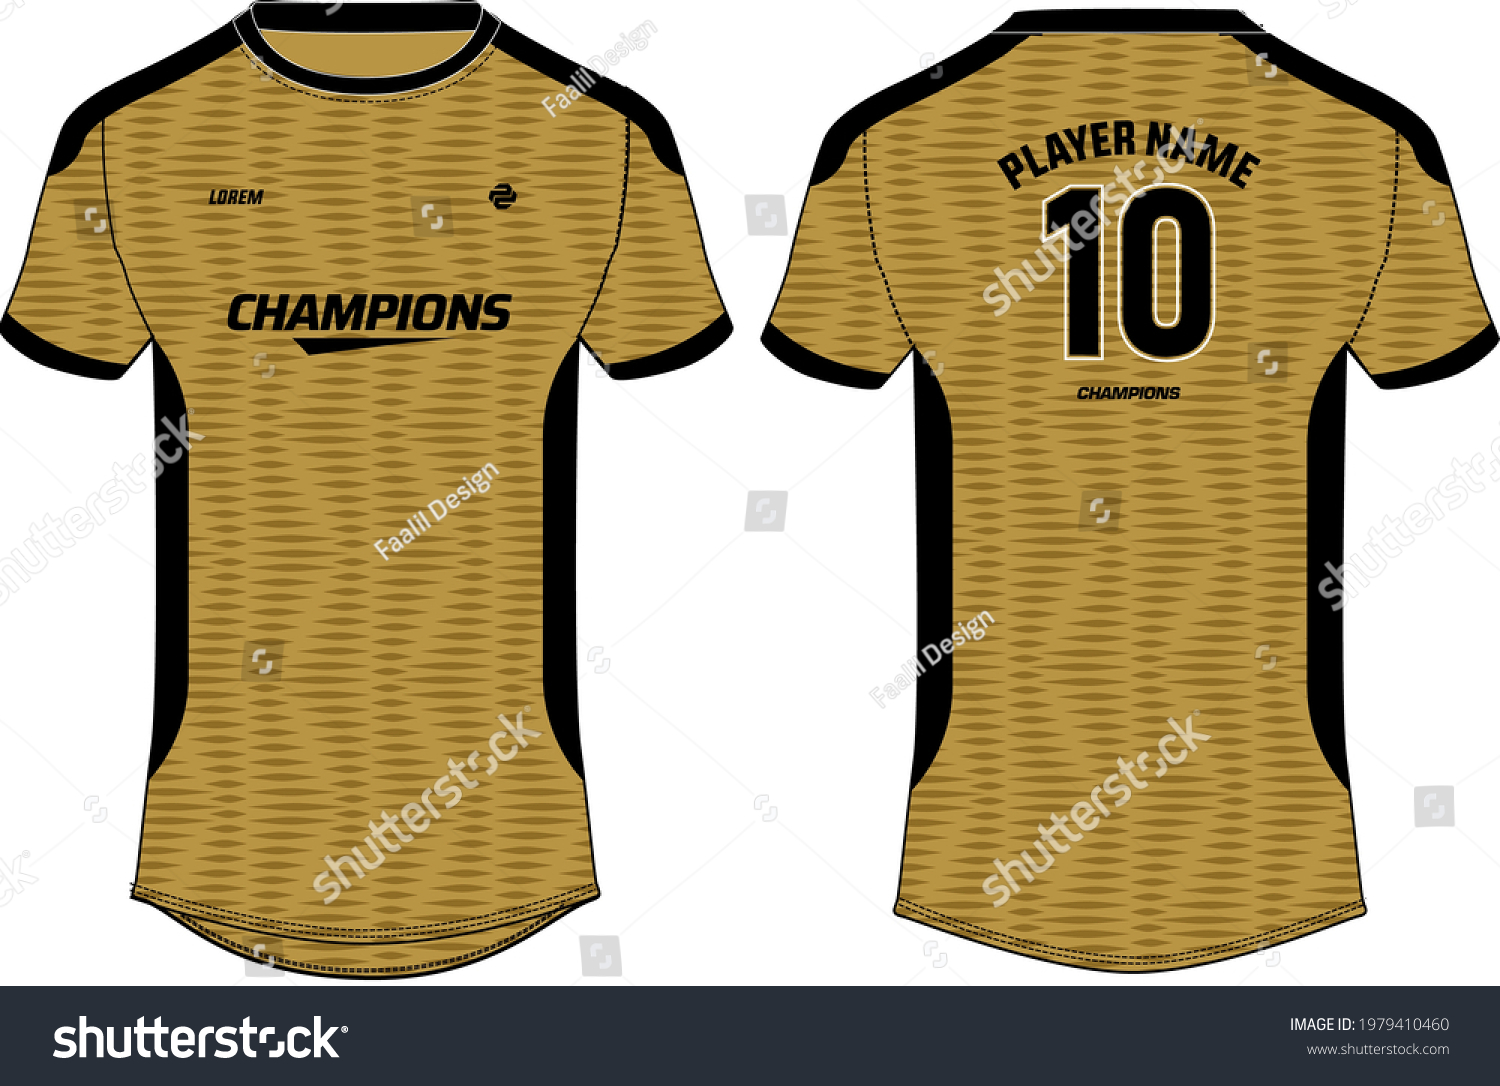 Sports Jersey T Shirt Design Concept Stock Vector (Royalty Free ...